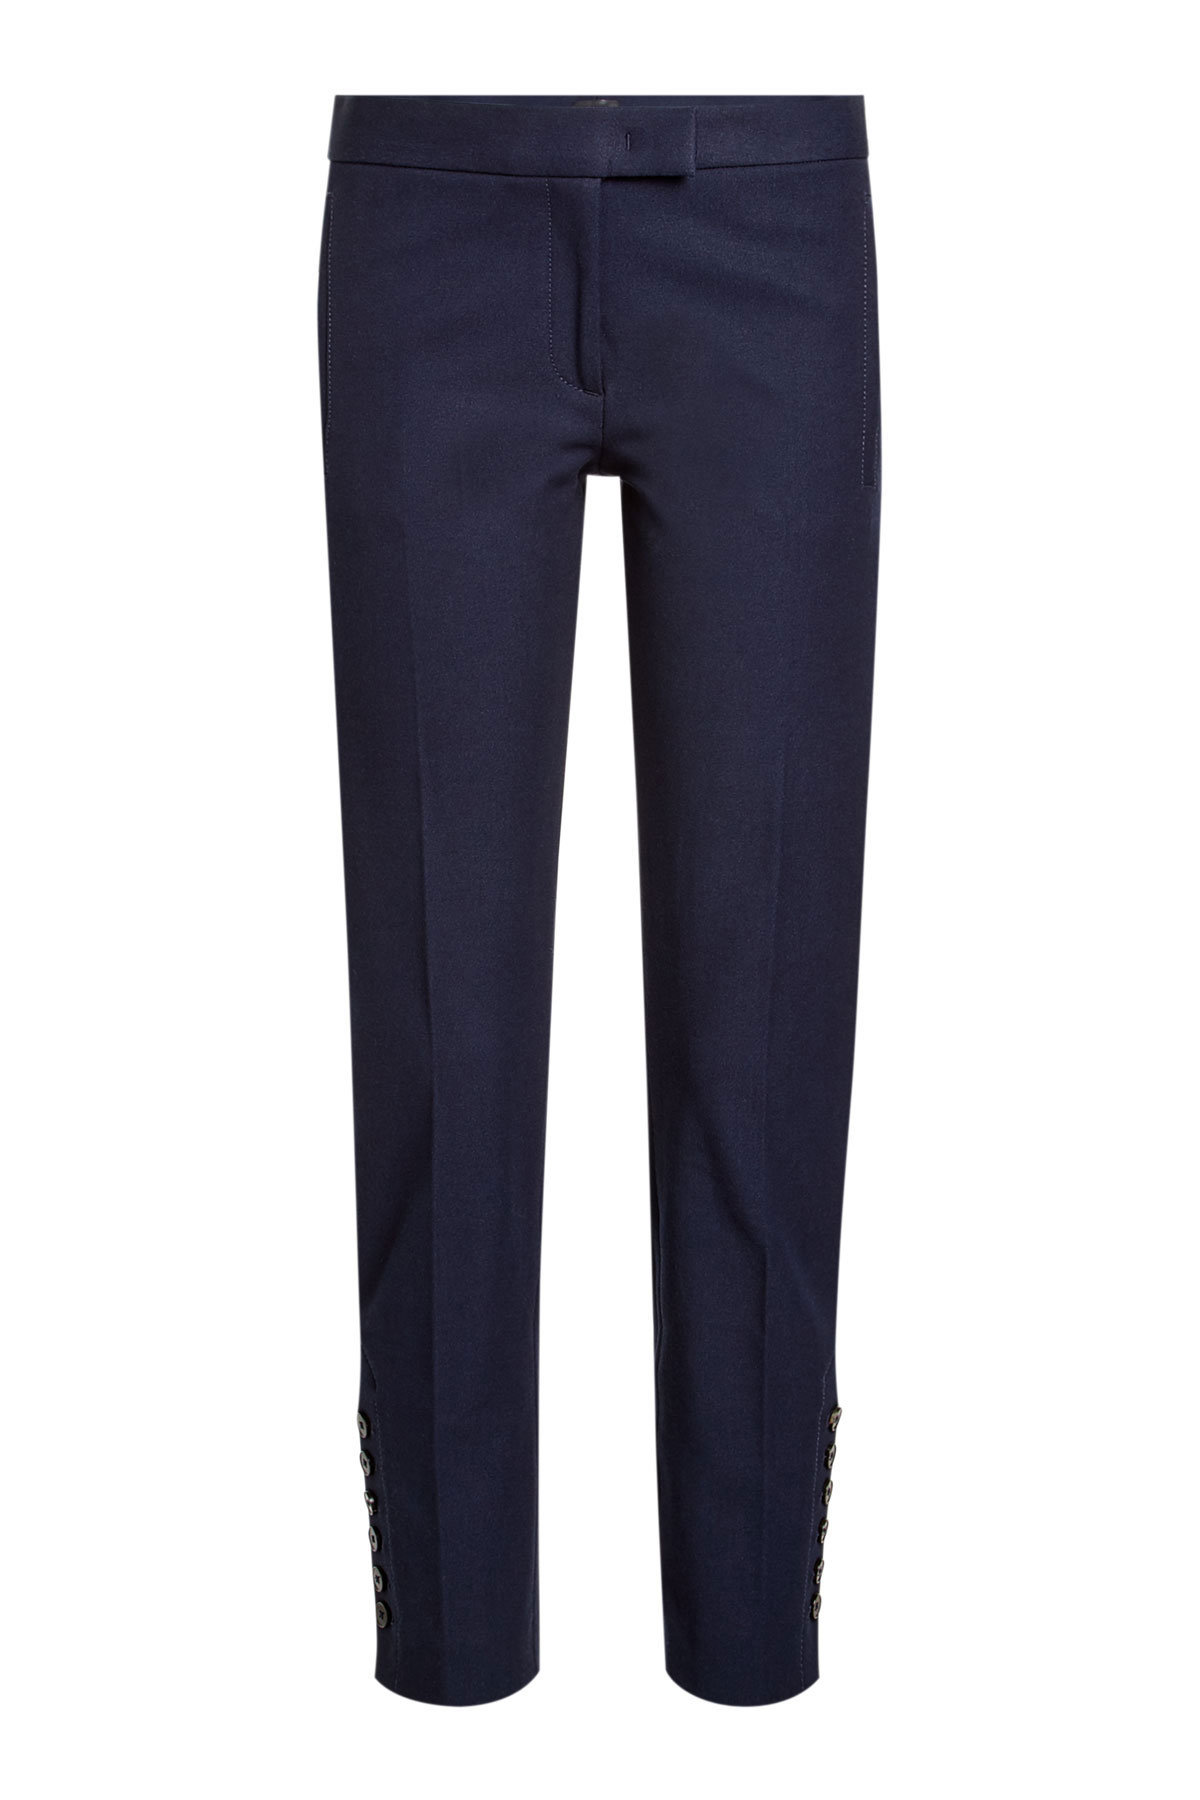 Joseph - Tailored Pants with Cotton